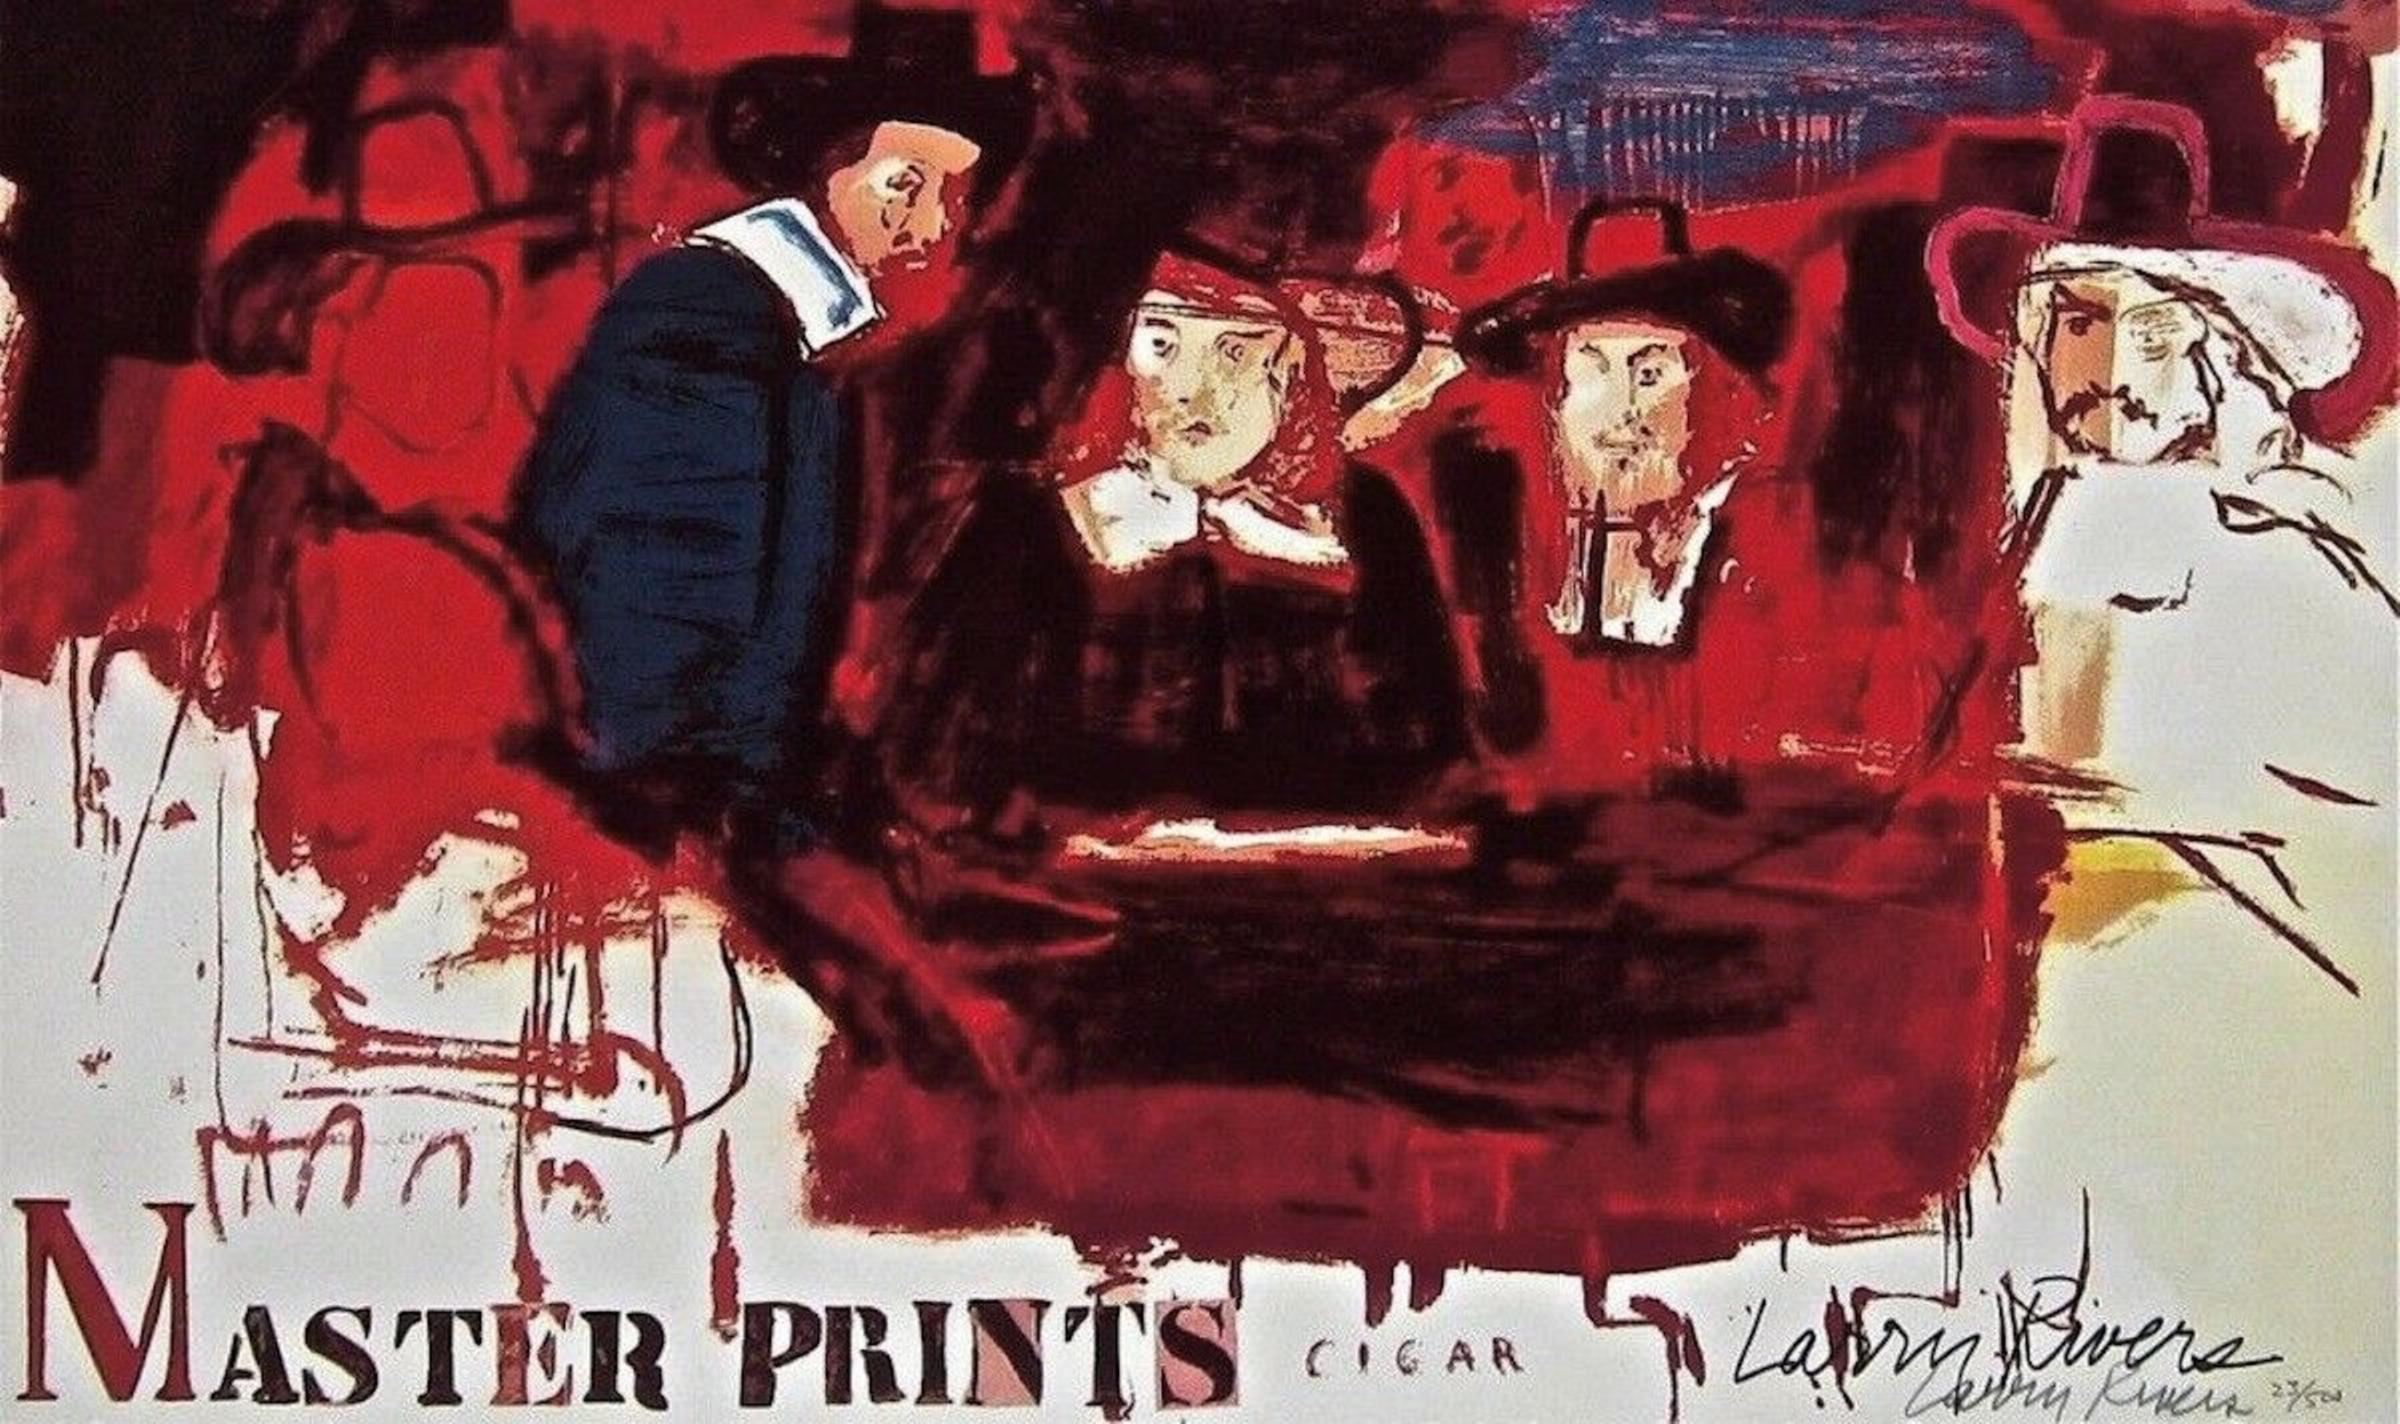 Dutch Masters - Abstract Expressionist Print by Larry Rivers